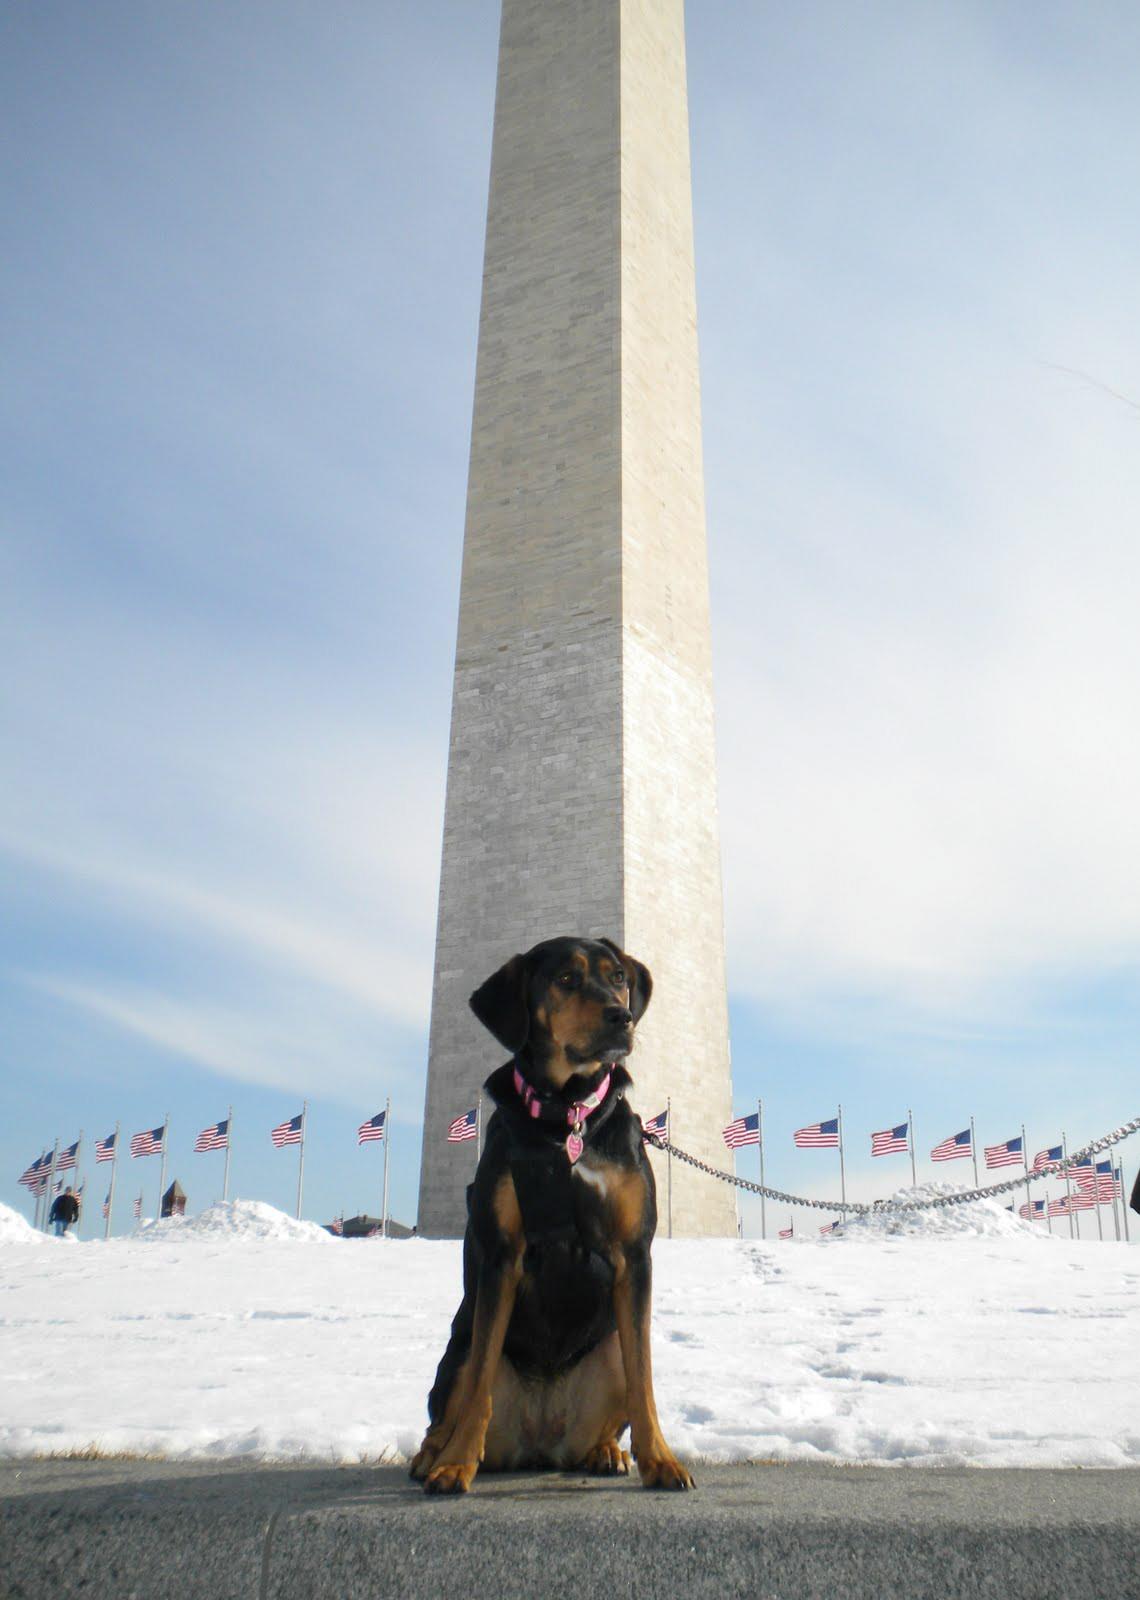 are dogs allowed at washington dc monuments